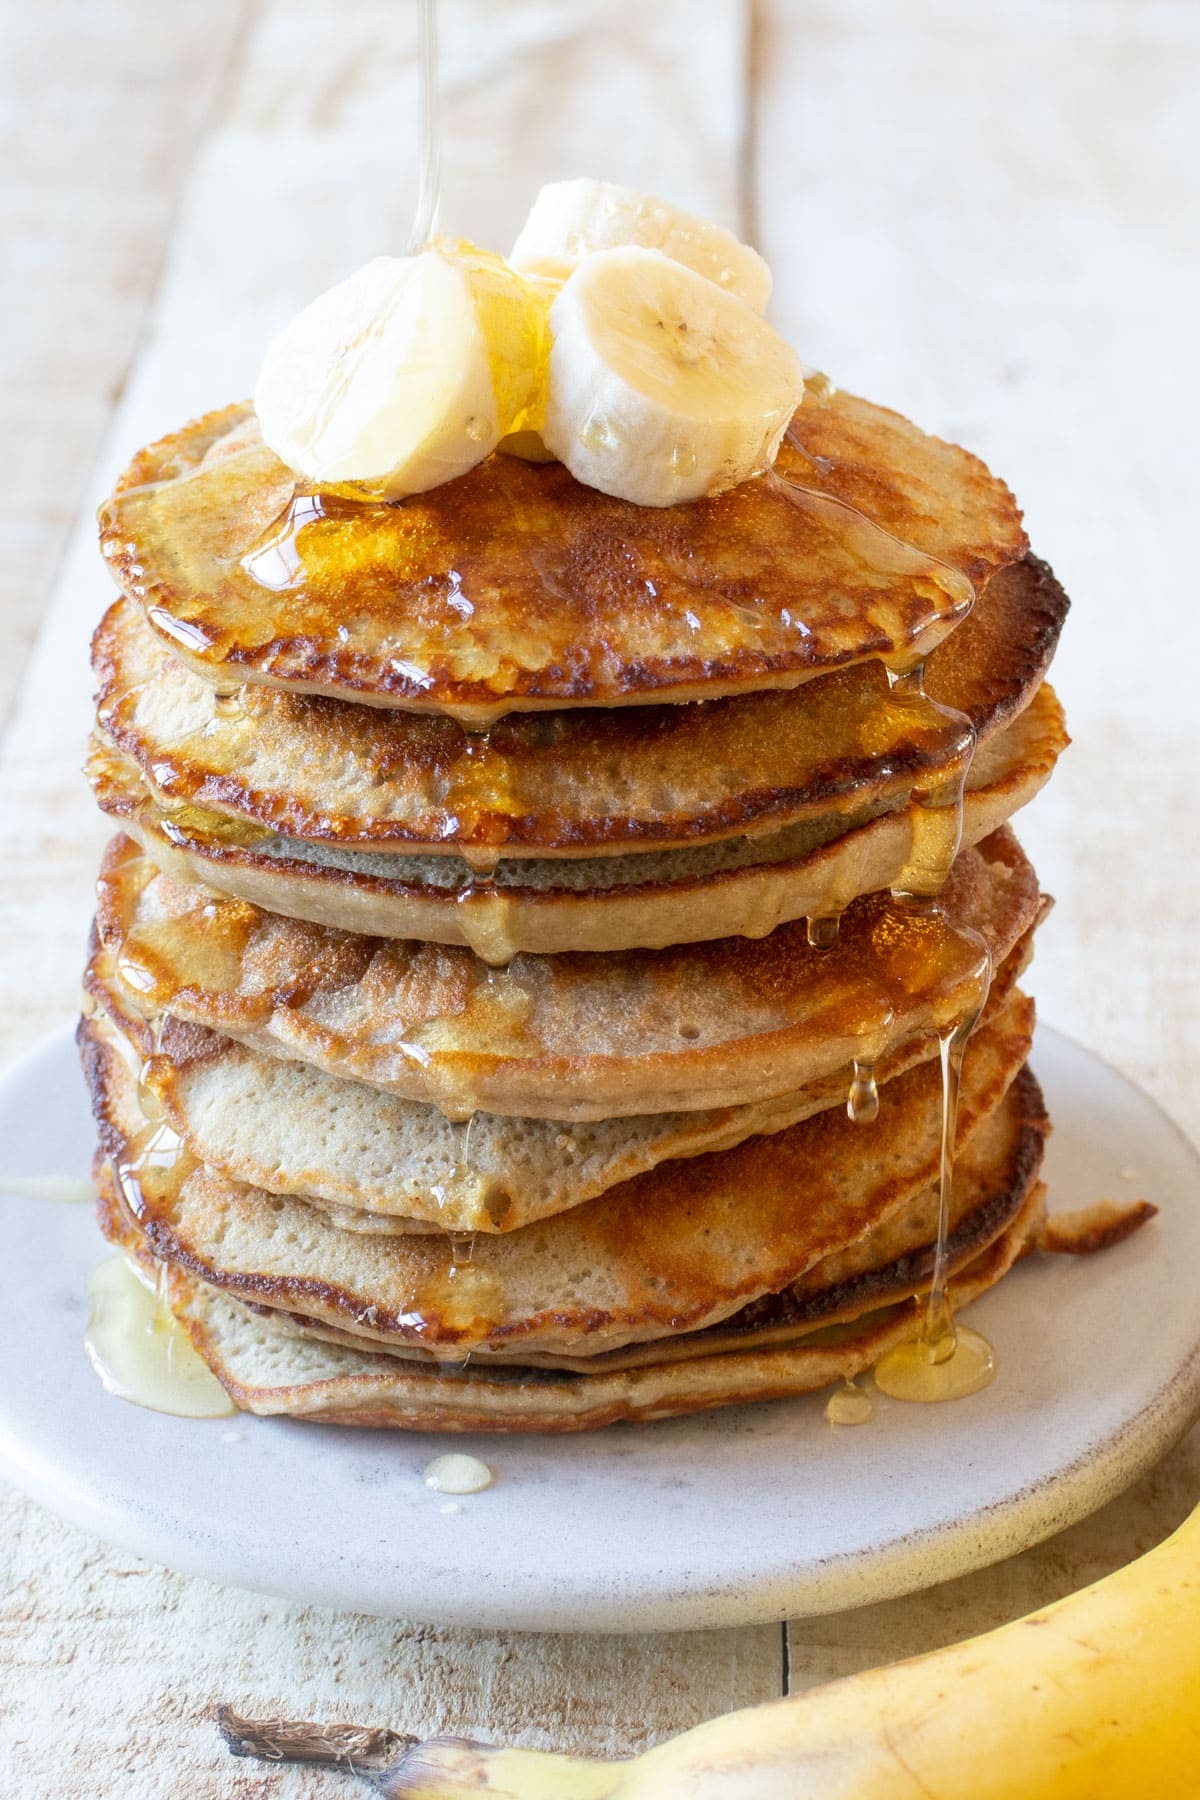 A stack of almond flour pancakes with banana slices on top and syrup.